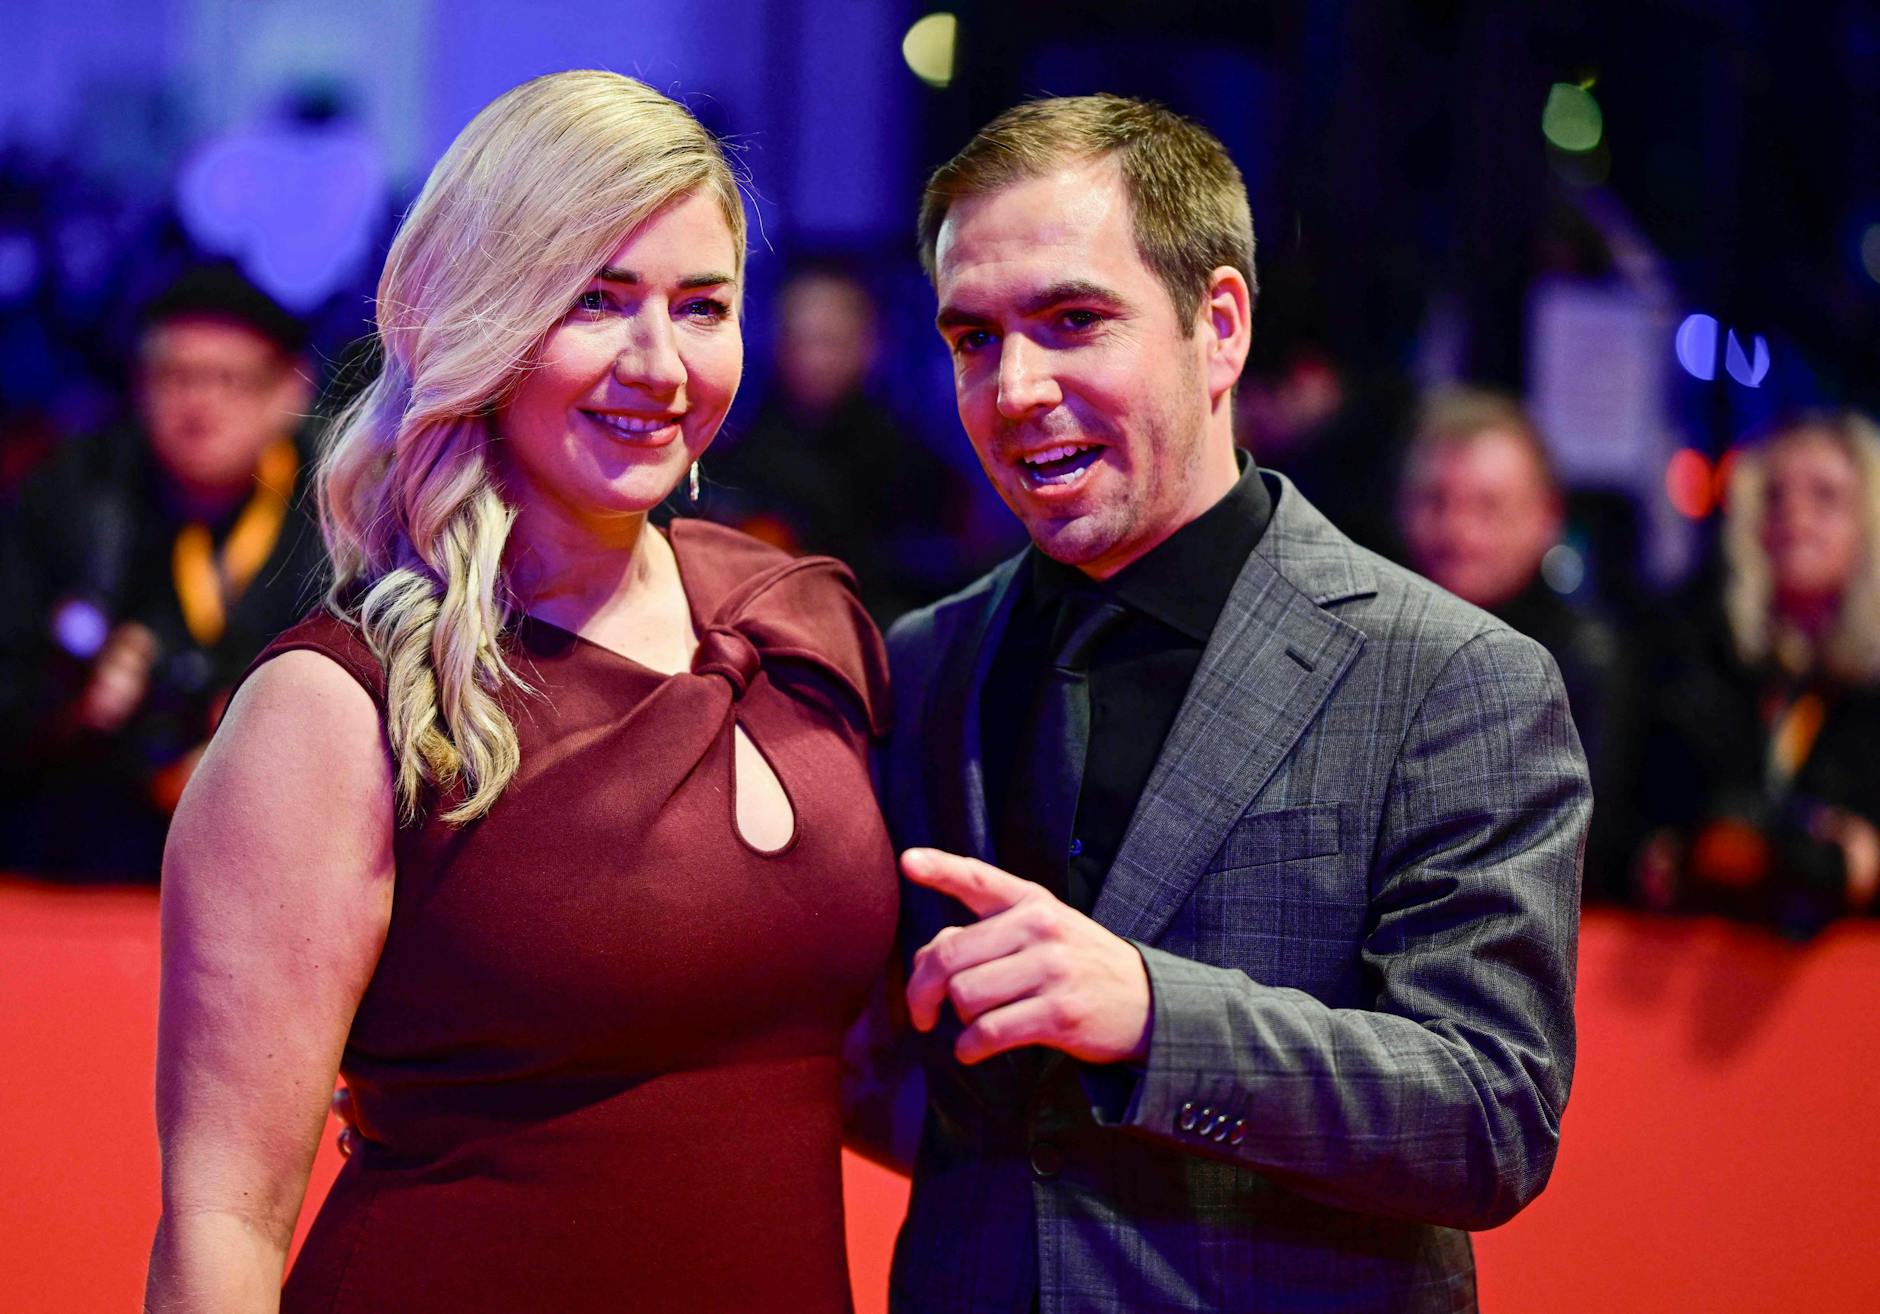 One of the first guests: soccer world champion Philipp Lahm with his wife Claudia